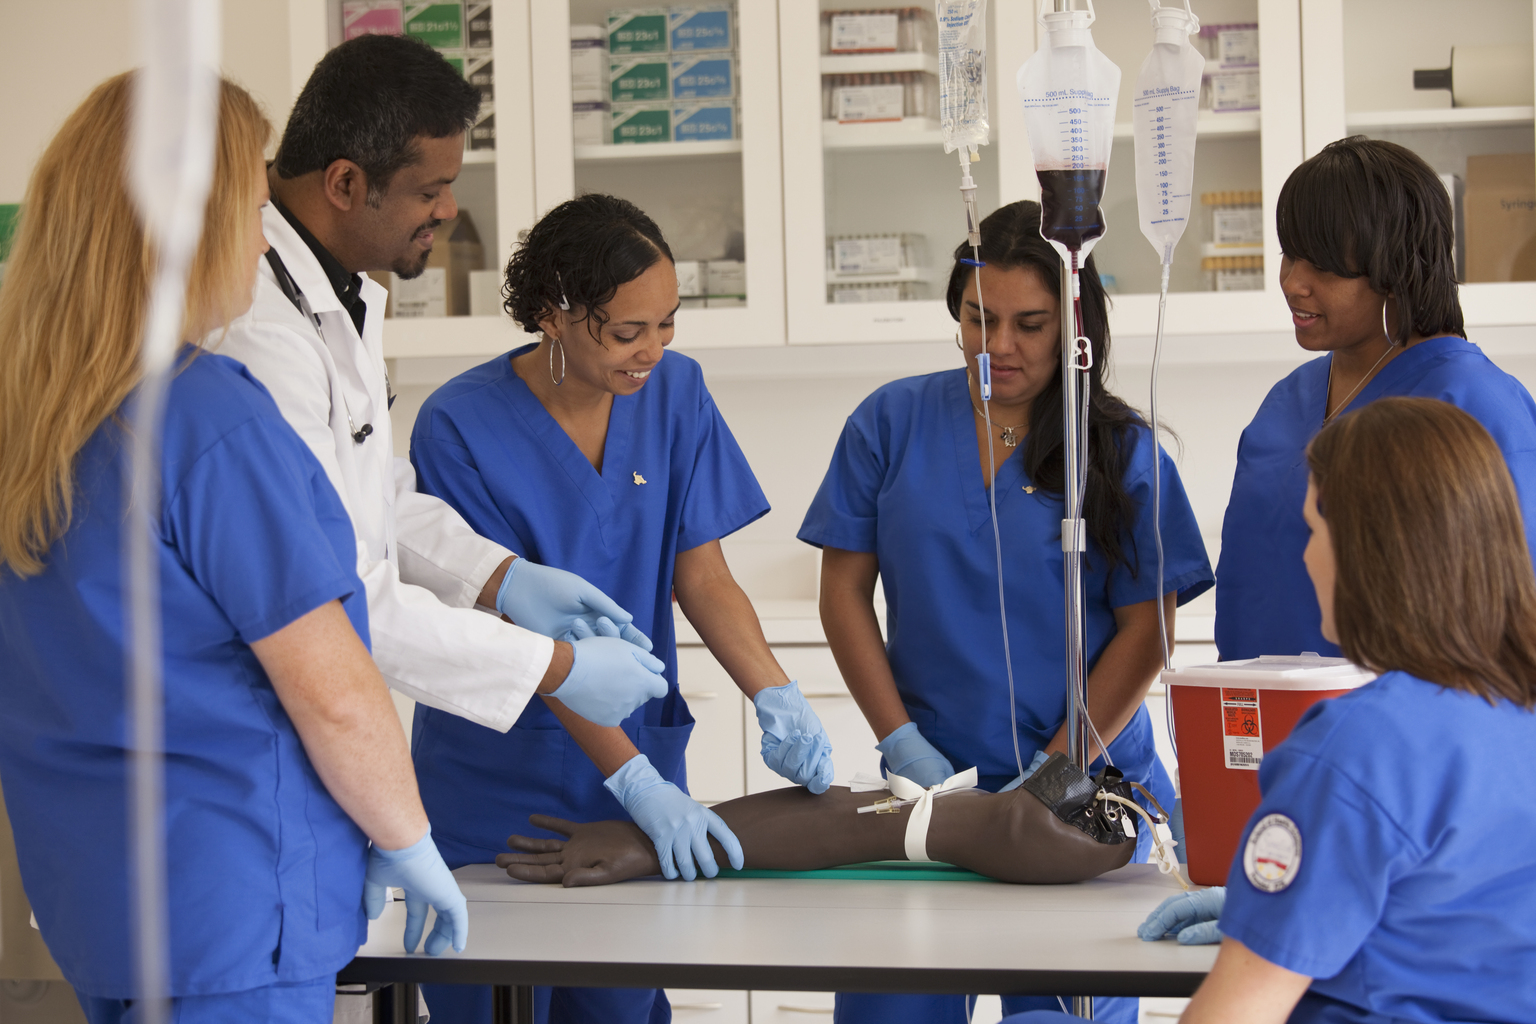 Nurses learning to insert an IV drip in hospital.